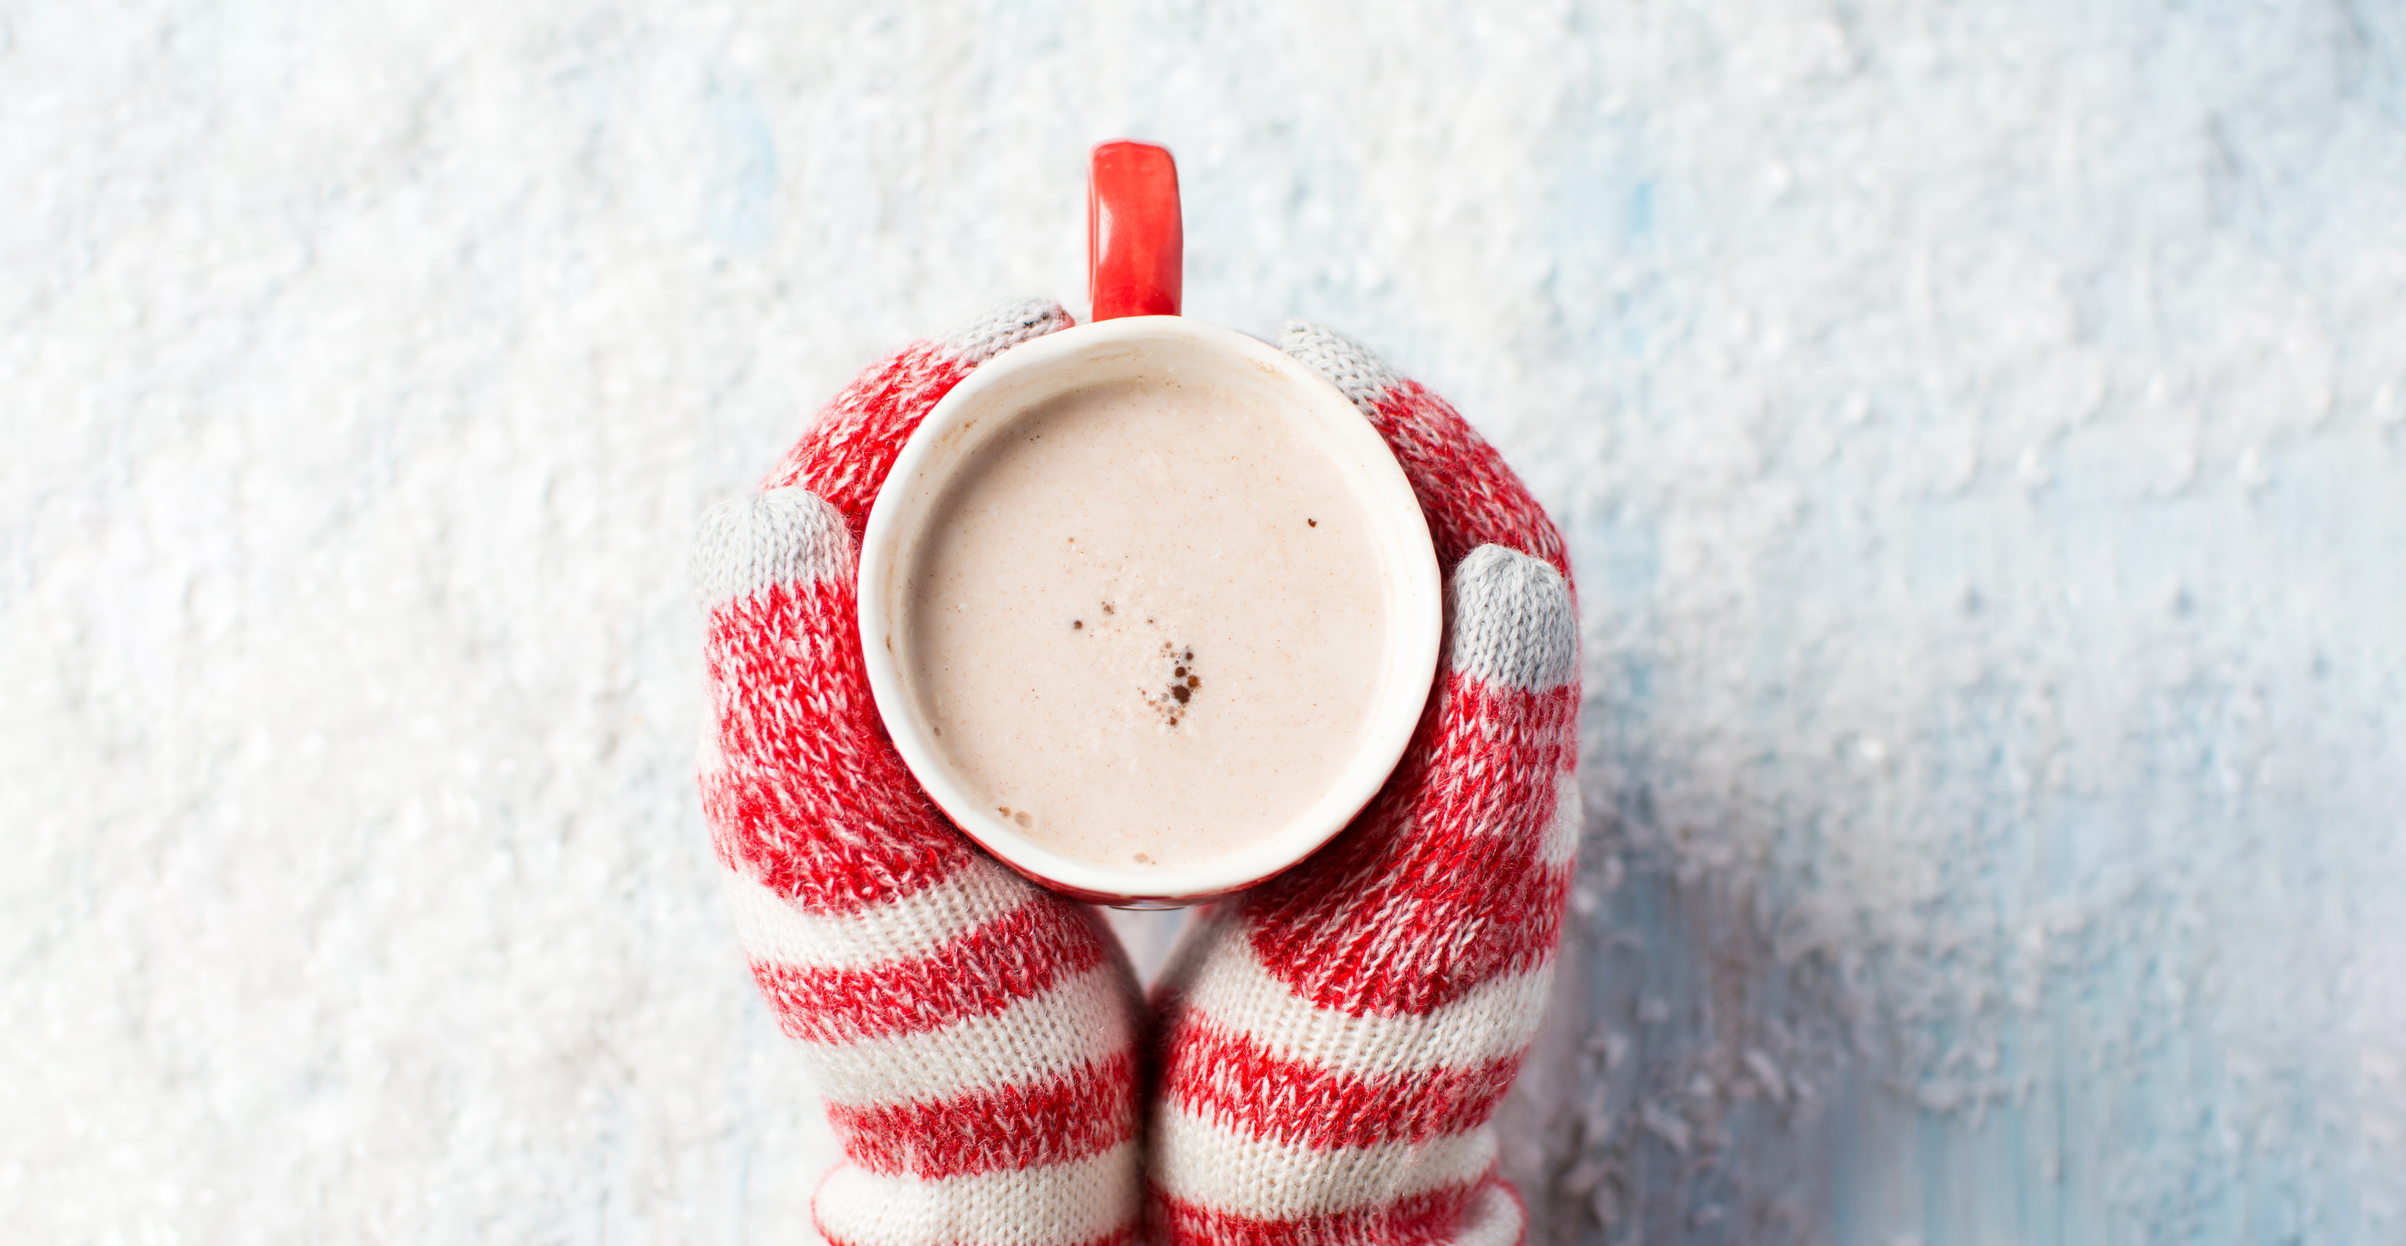 female hands in gloves holding hot chocolate over a snowy background